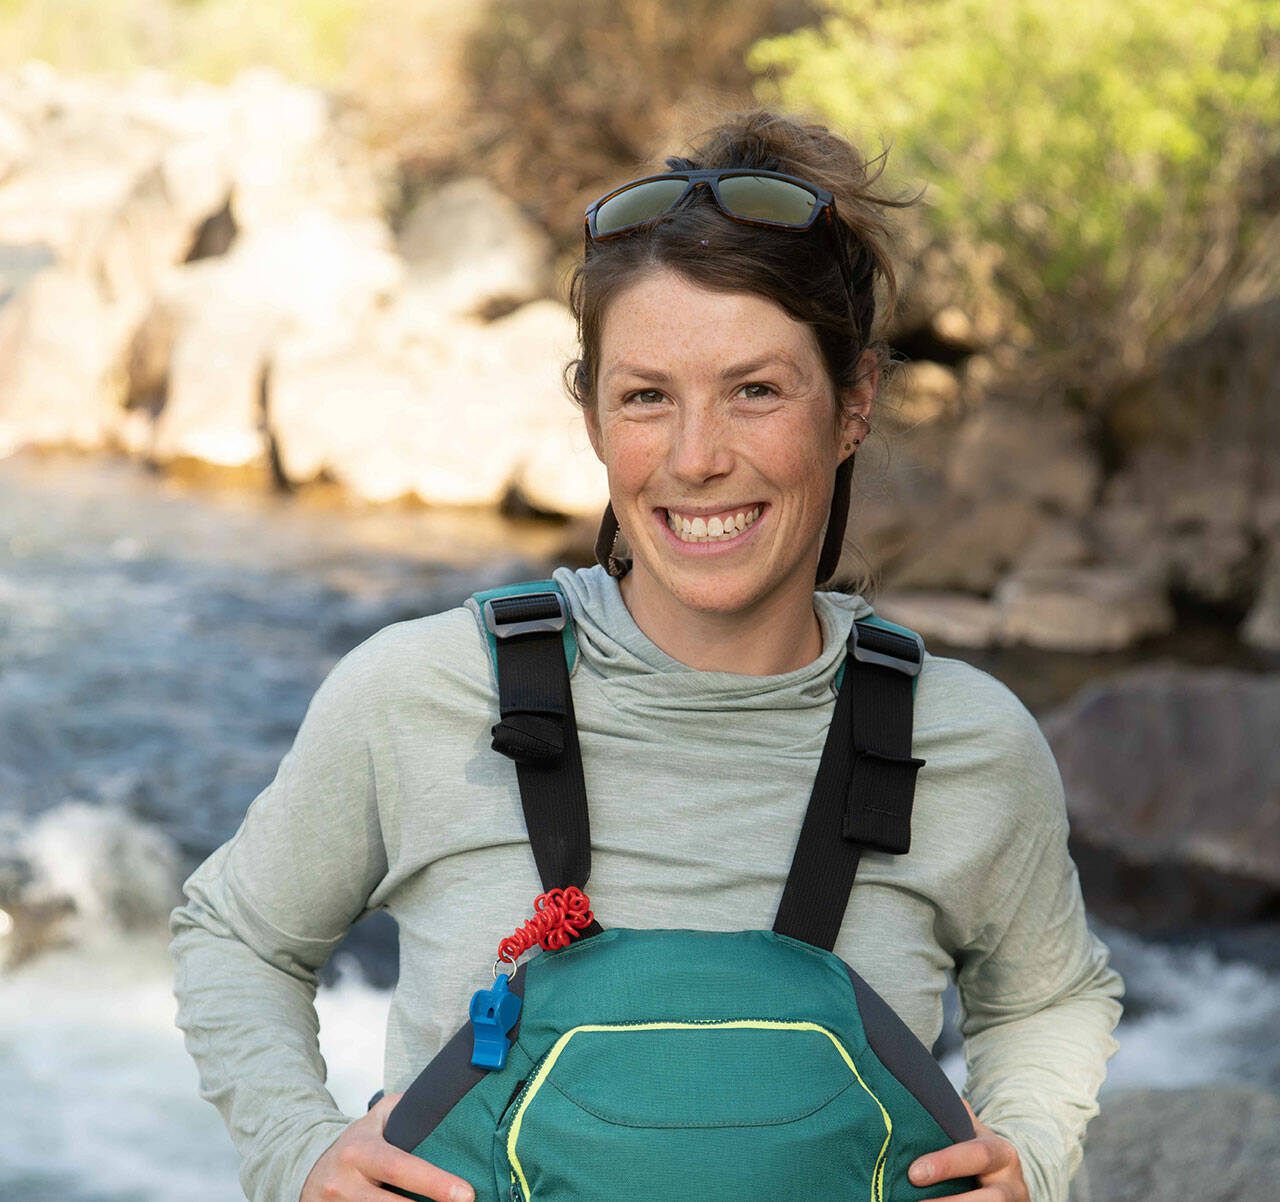 (Courtesy Salmon Source to Sea) Alia Payne, who grew up on Vashon, is currently kayaking more than 1,000 miles along the Salmon, Snake and Columbia Rivers and is creating a short film of the journey.